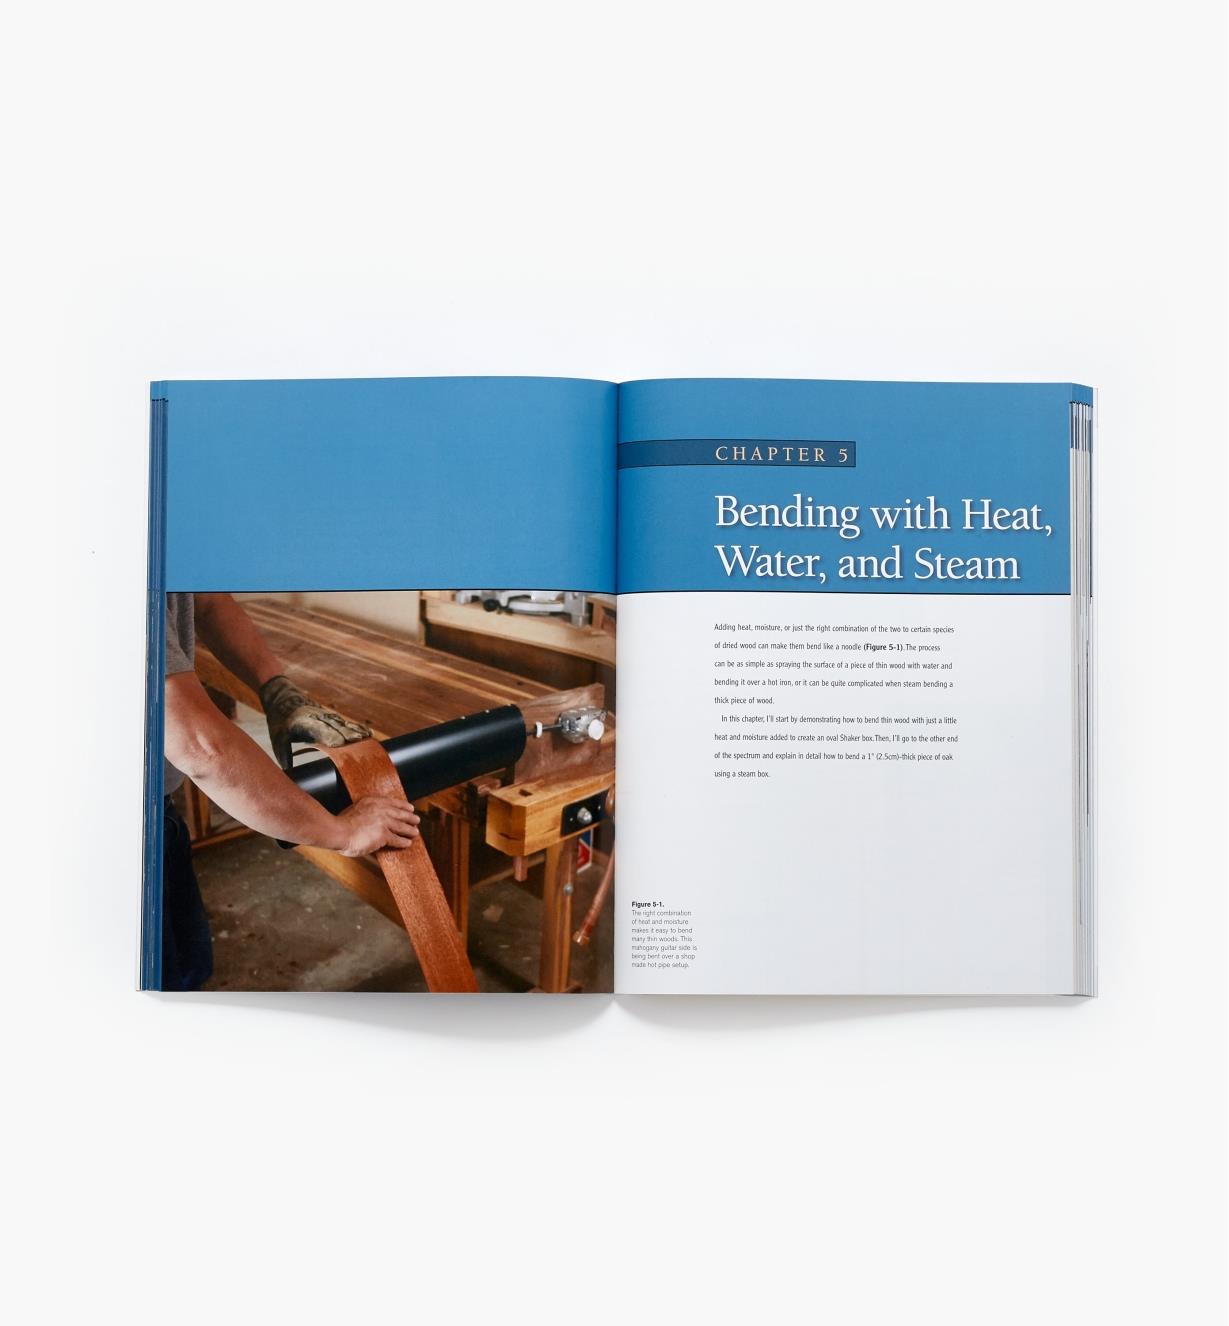 49L5063 - Woodworker's Guide to Bending Wood